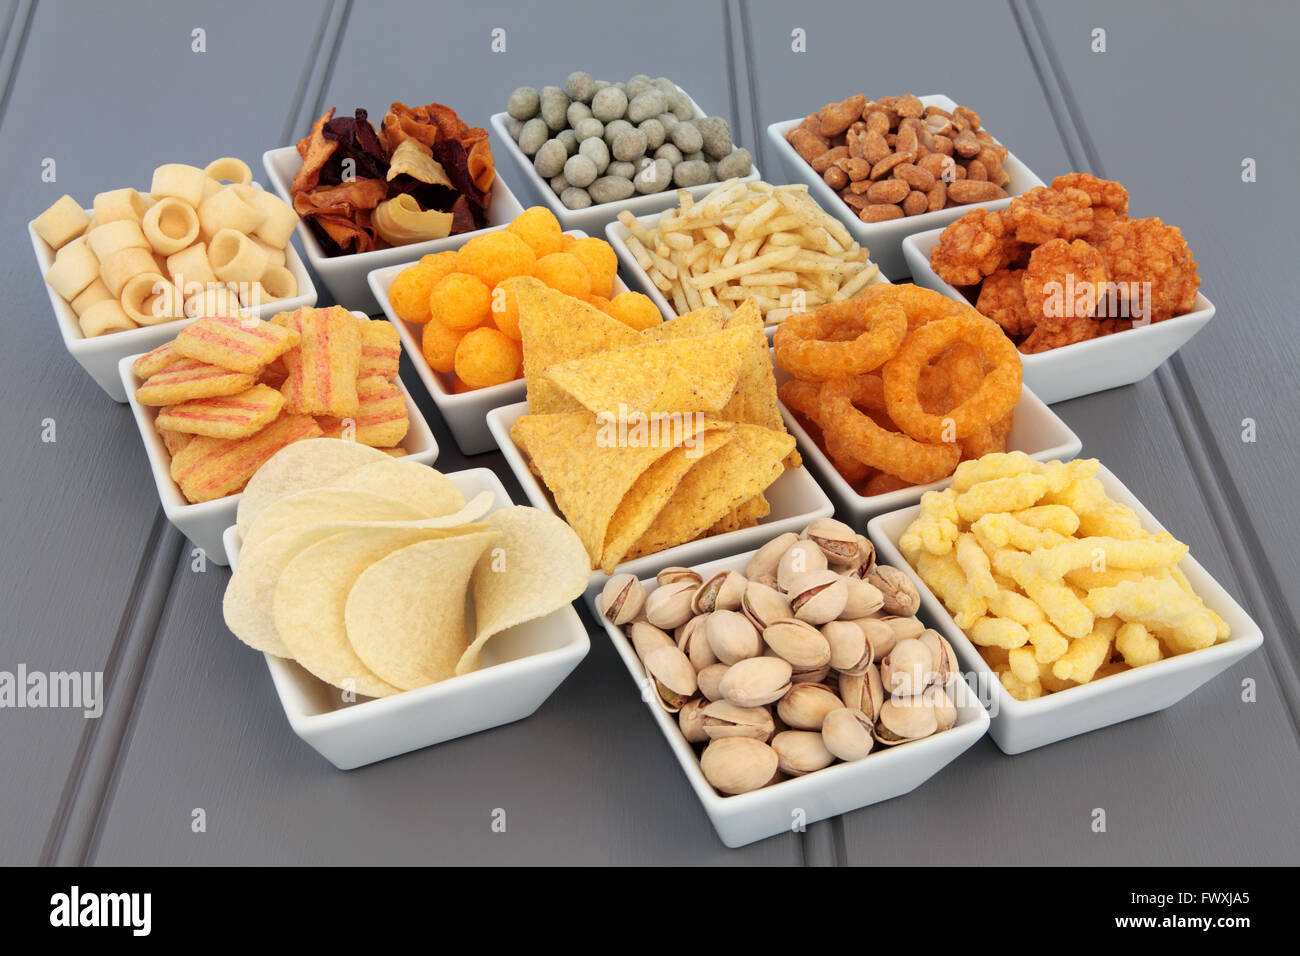 Savory snack party food selection in square porcelain bowls. Stock Photo